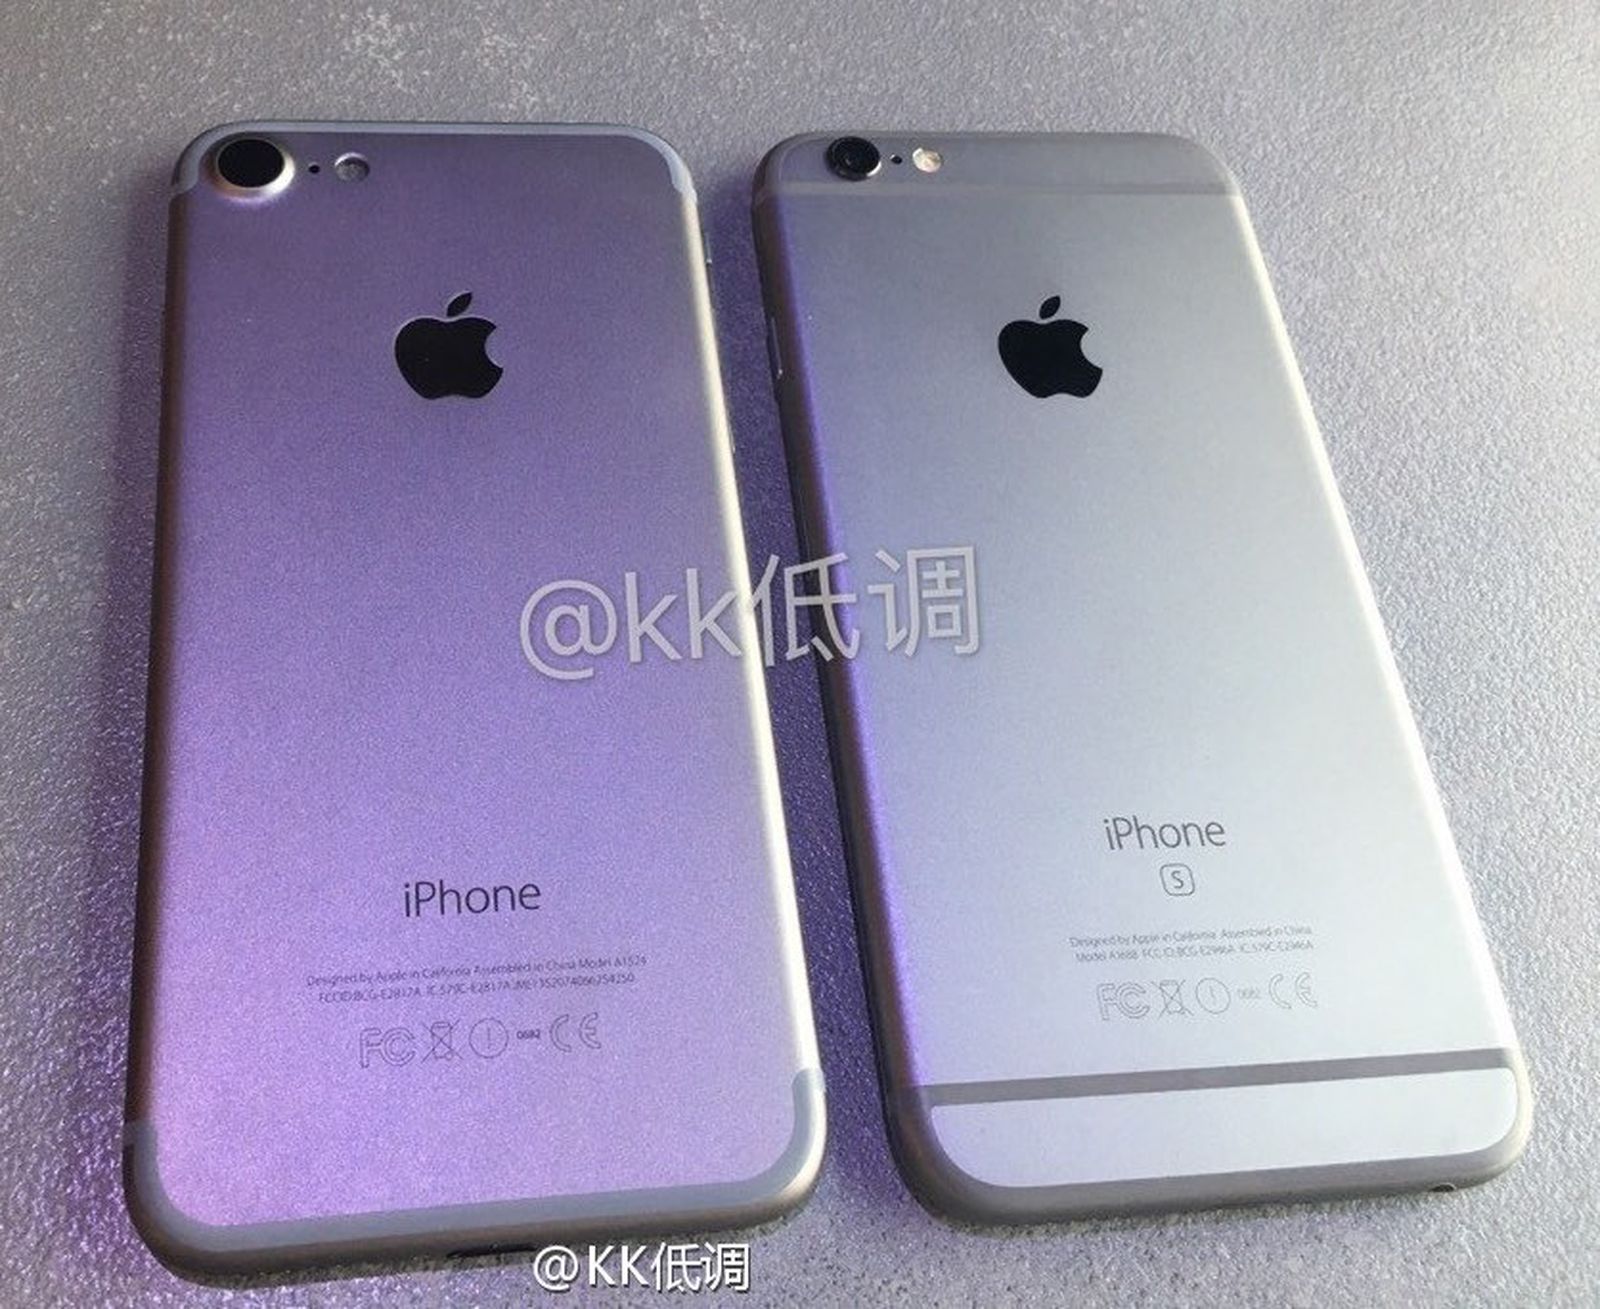 New Iphone 7 Video Offers Side By Side Comparison With Iphone 6s